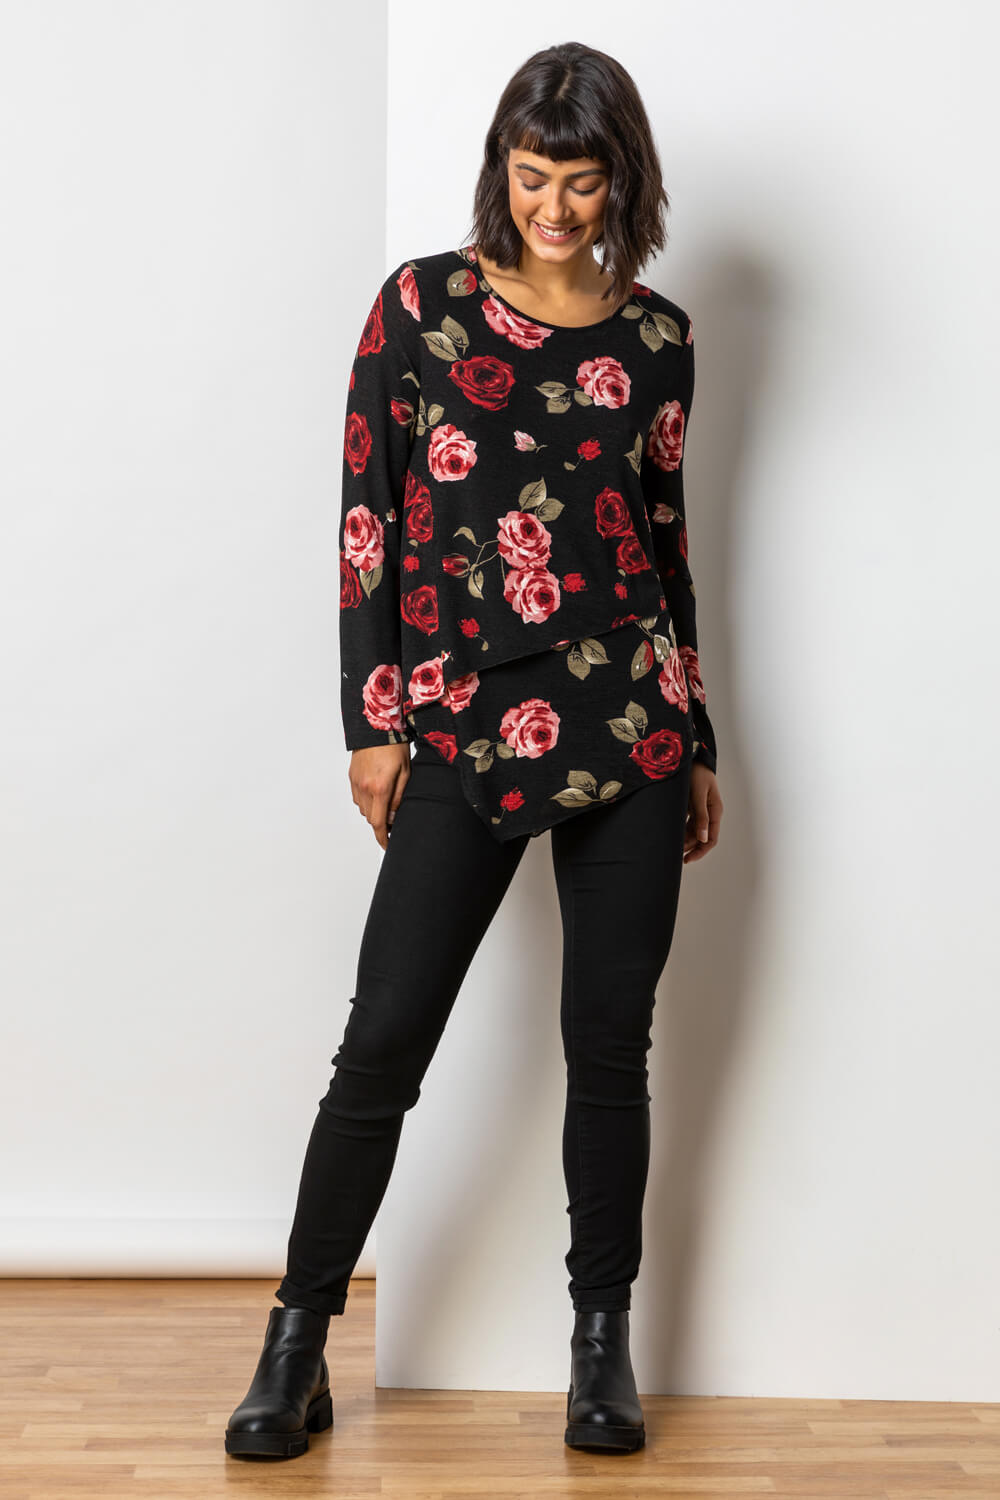 PINK Floral Rose Print Layered Asymmetric Top , Image 3 of 5